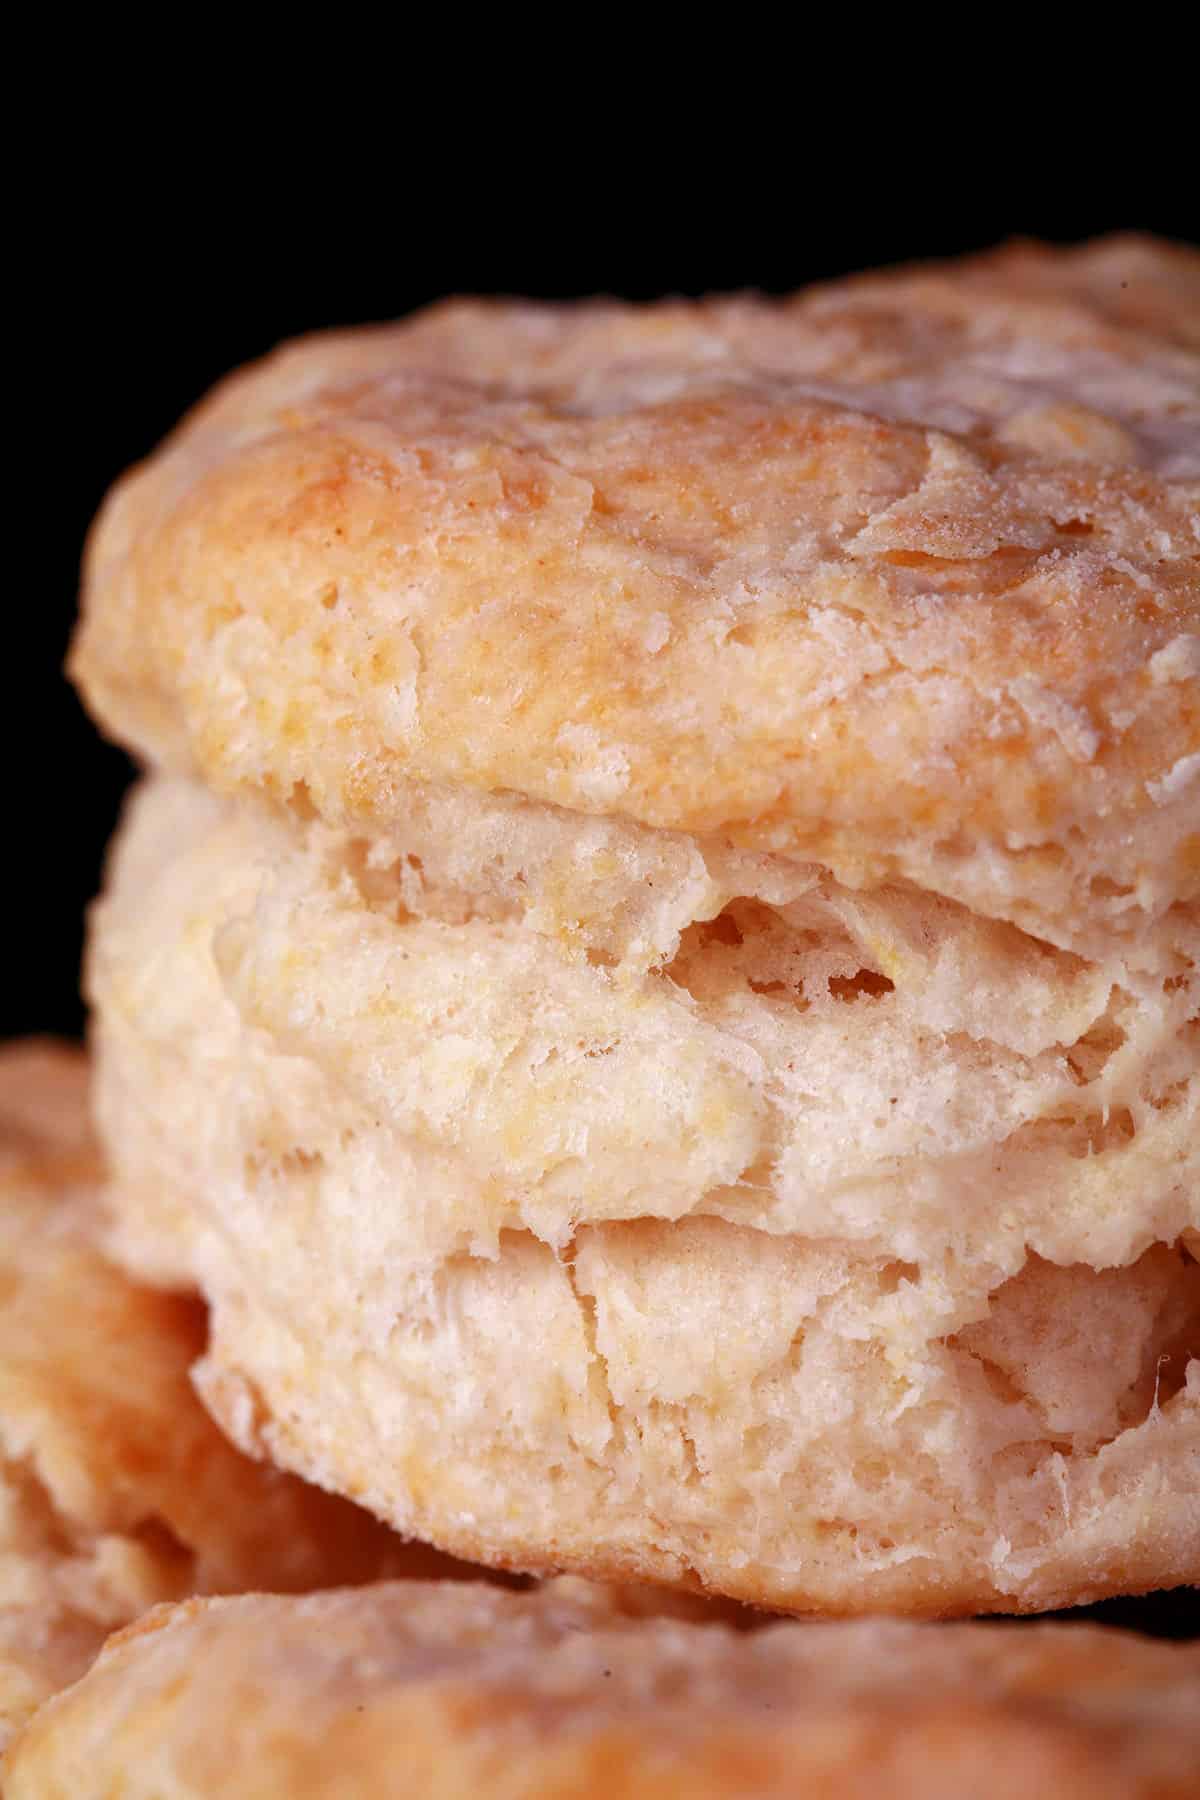 A close up view of a flaky baking powder biscuit.